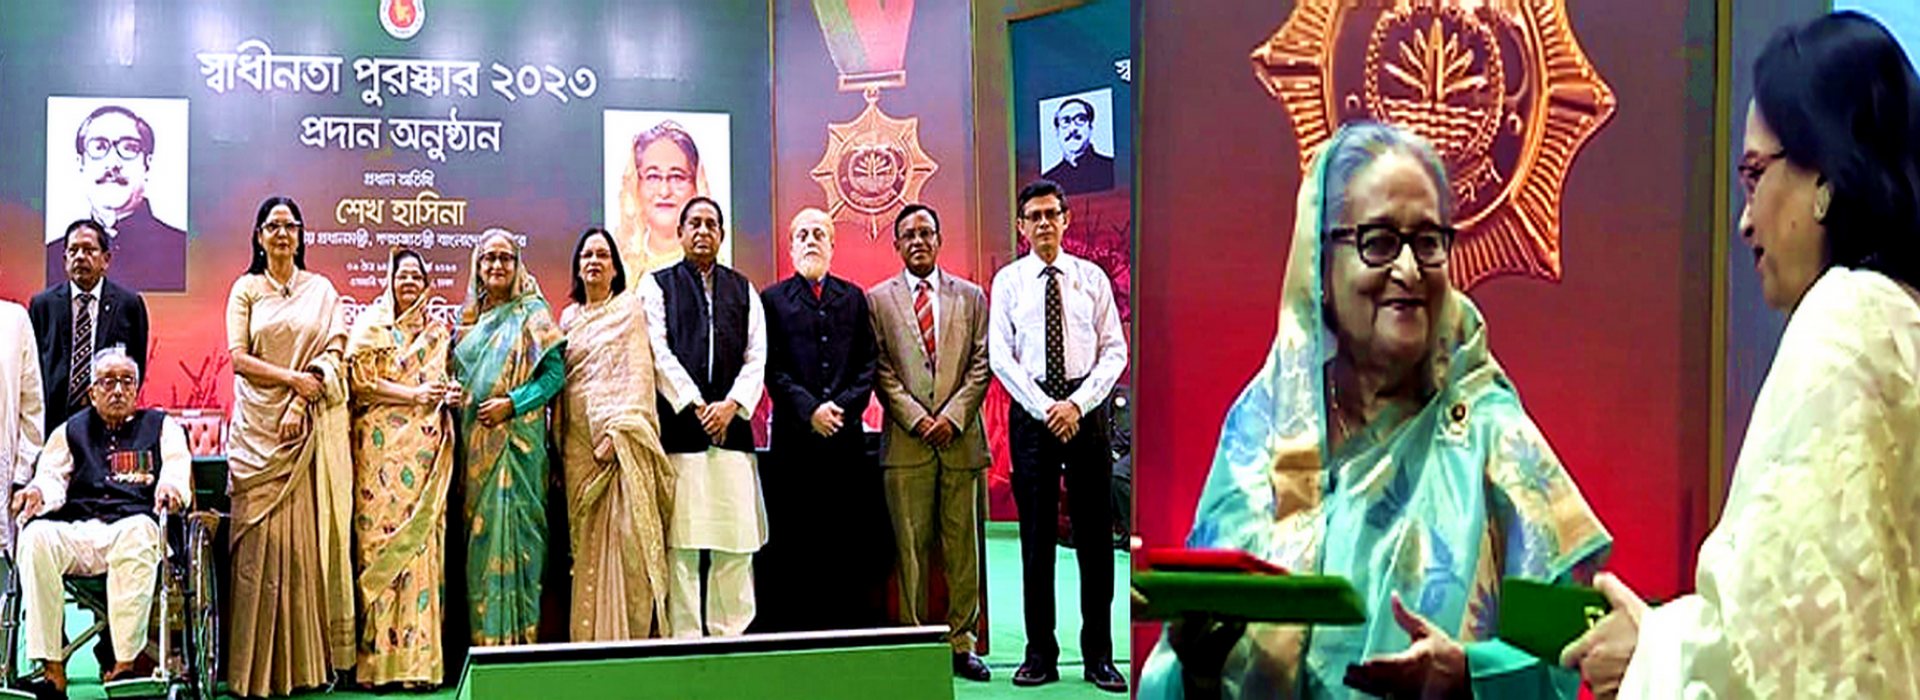 On March 23, 2023 (Thursday) Honorable Prime Minister Sheikh Hasina has handed over 